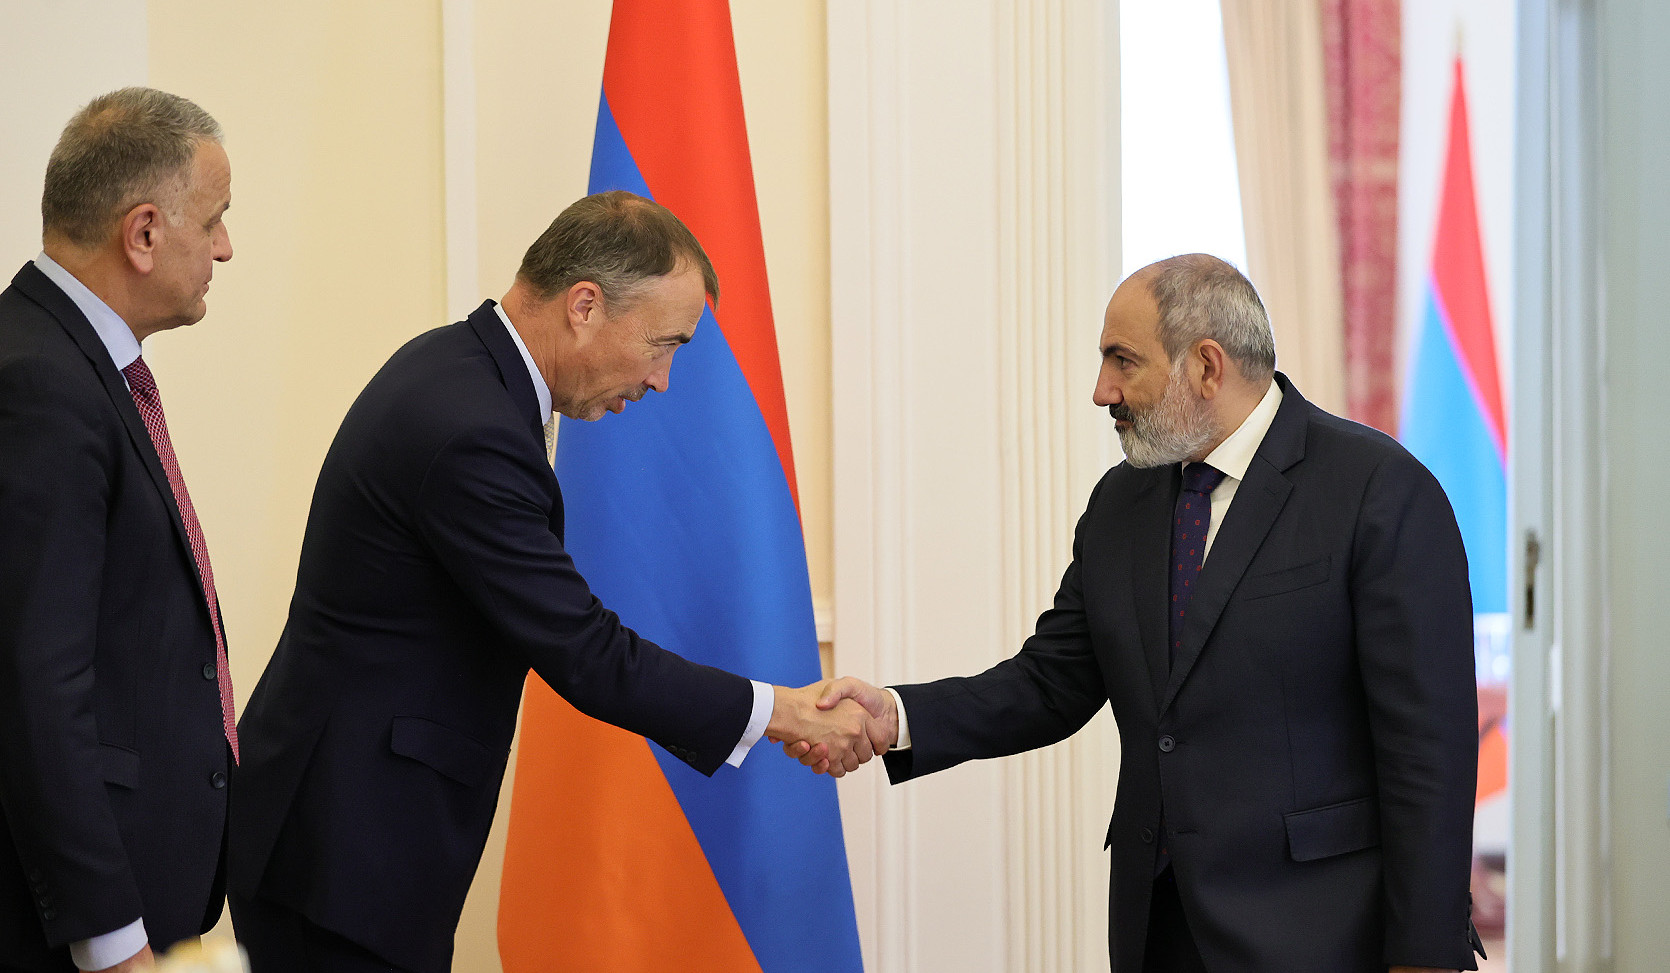 Prime Minister received Toivo Klaar: military-political situation created around Nagorno-Karabakh discussed